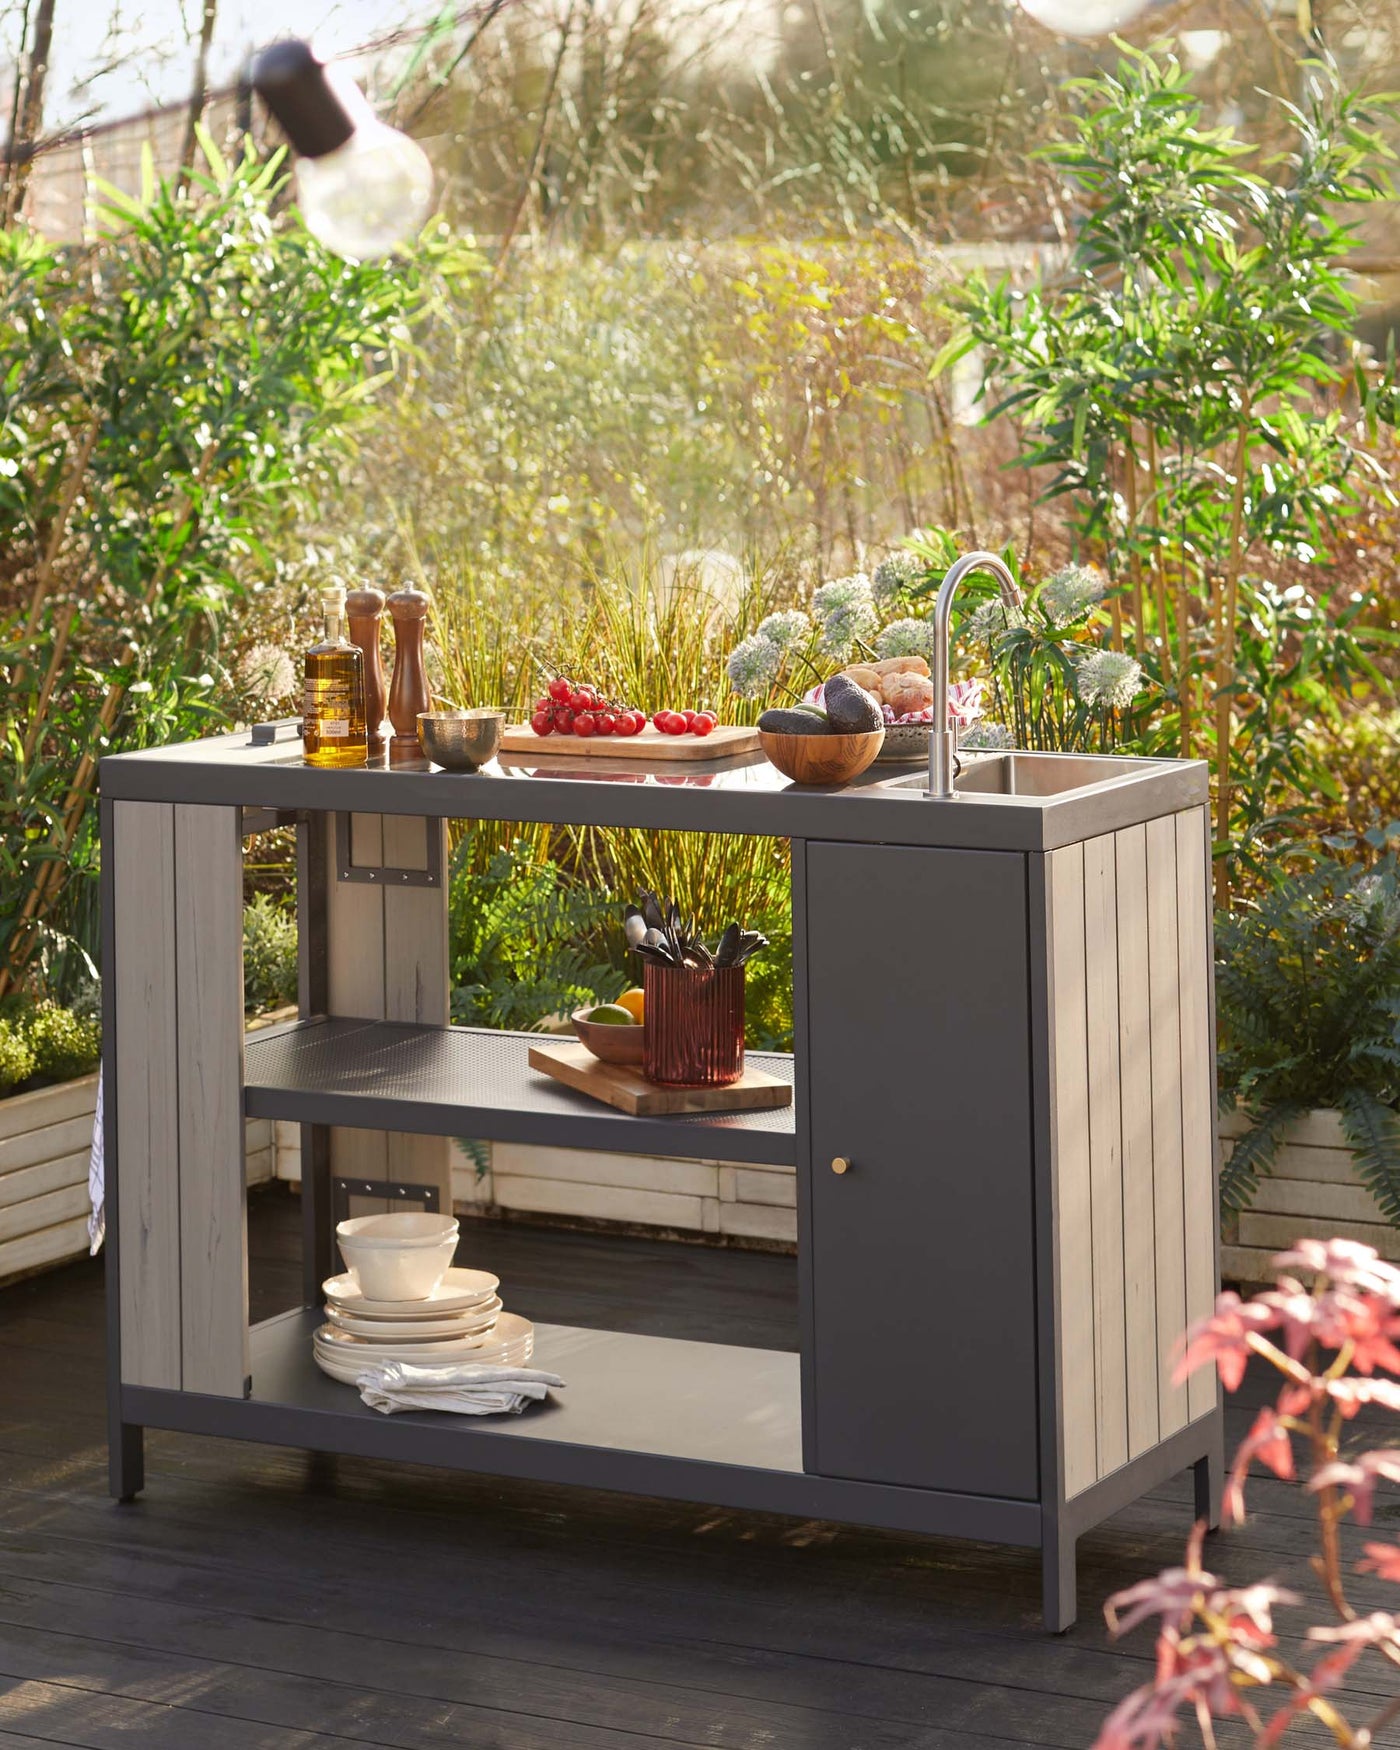 Outdoor cooking station featuring a modern, charcoal-grey finish with a built-in sink, an open lower shelf, and a side storage cabinet, displayed in a garden setting.